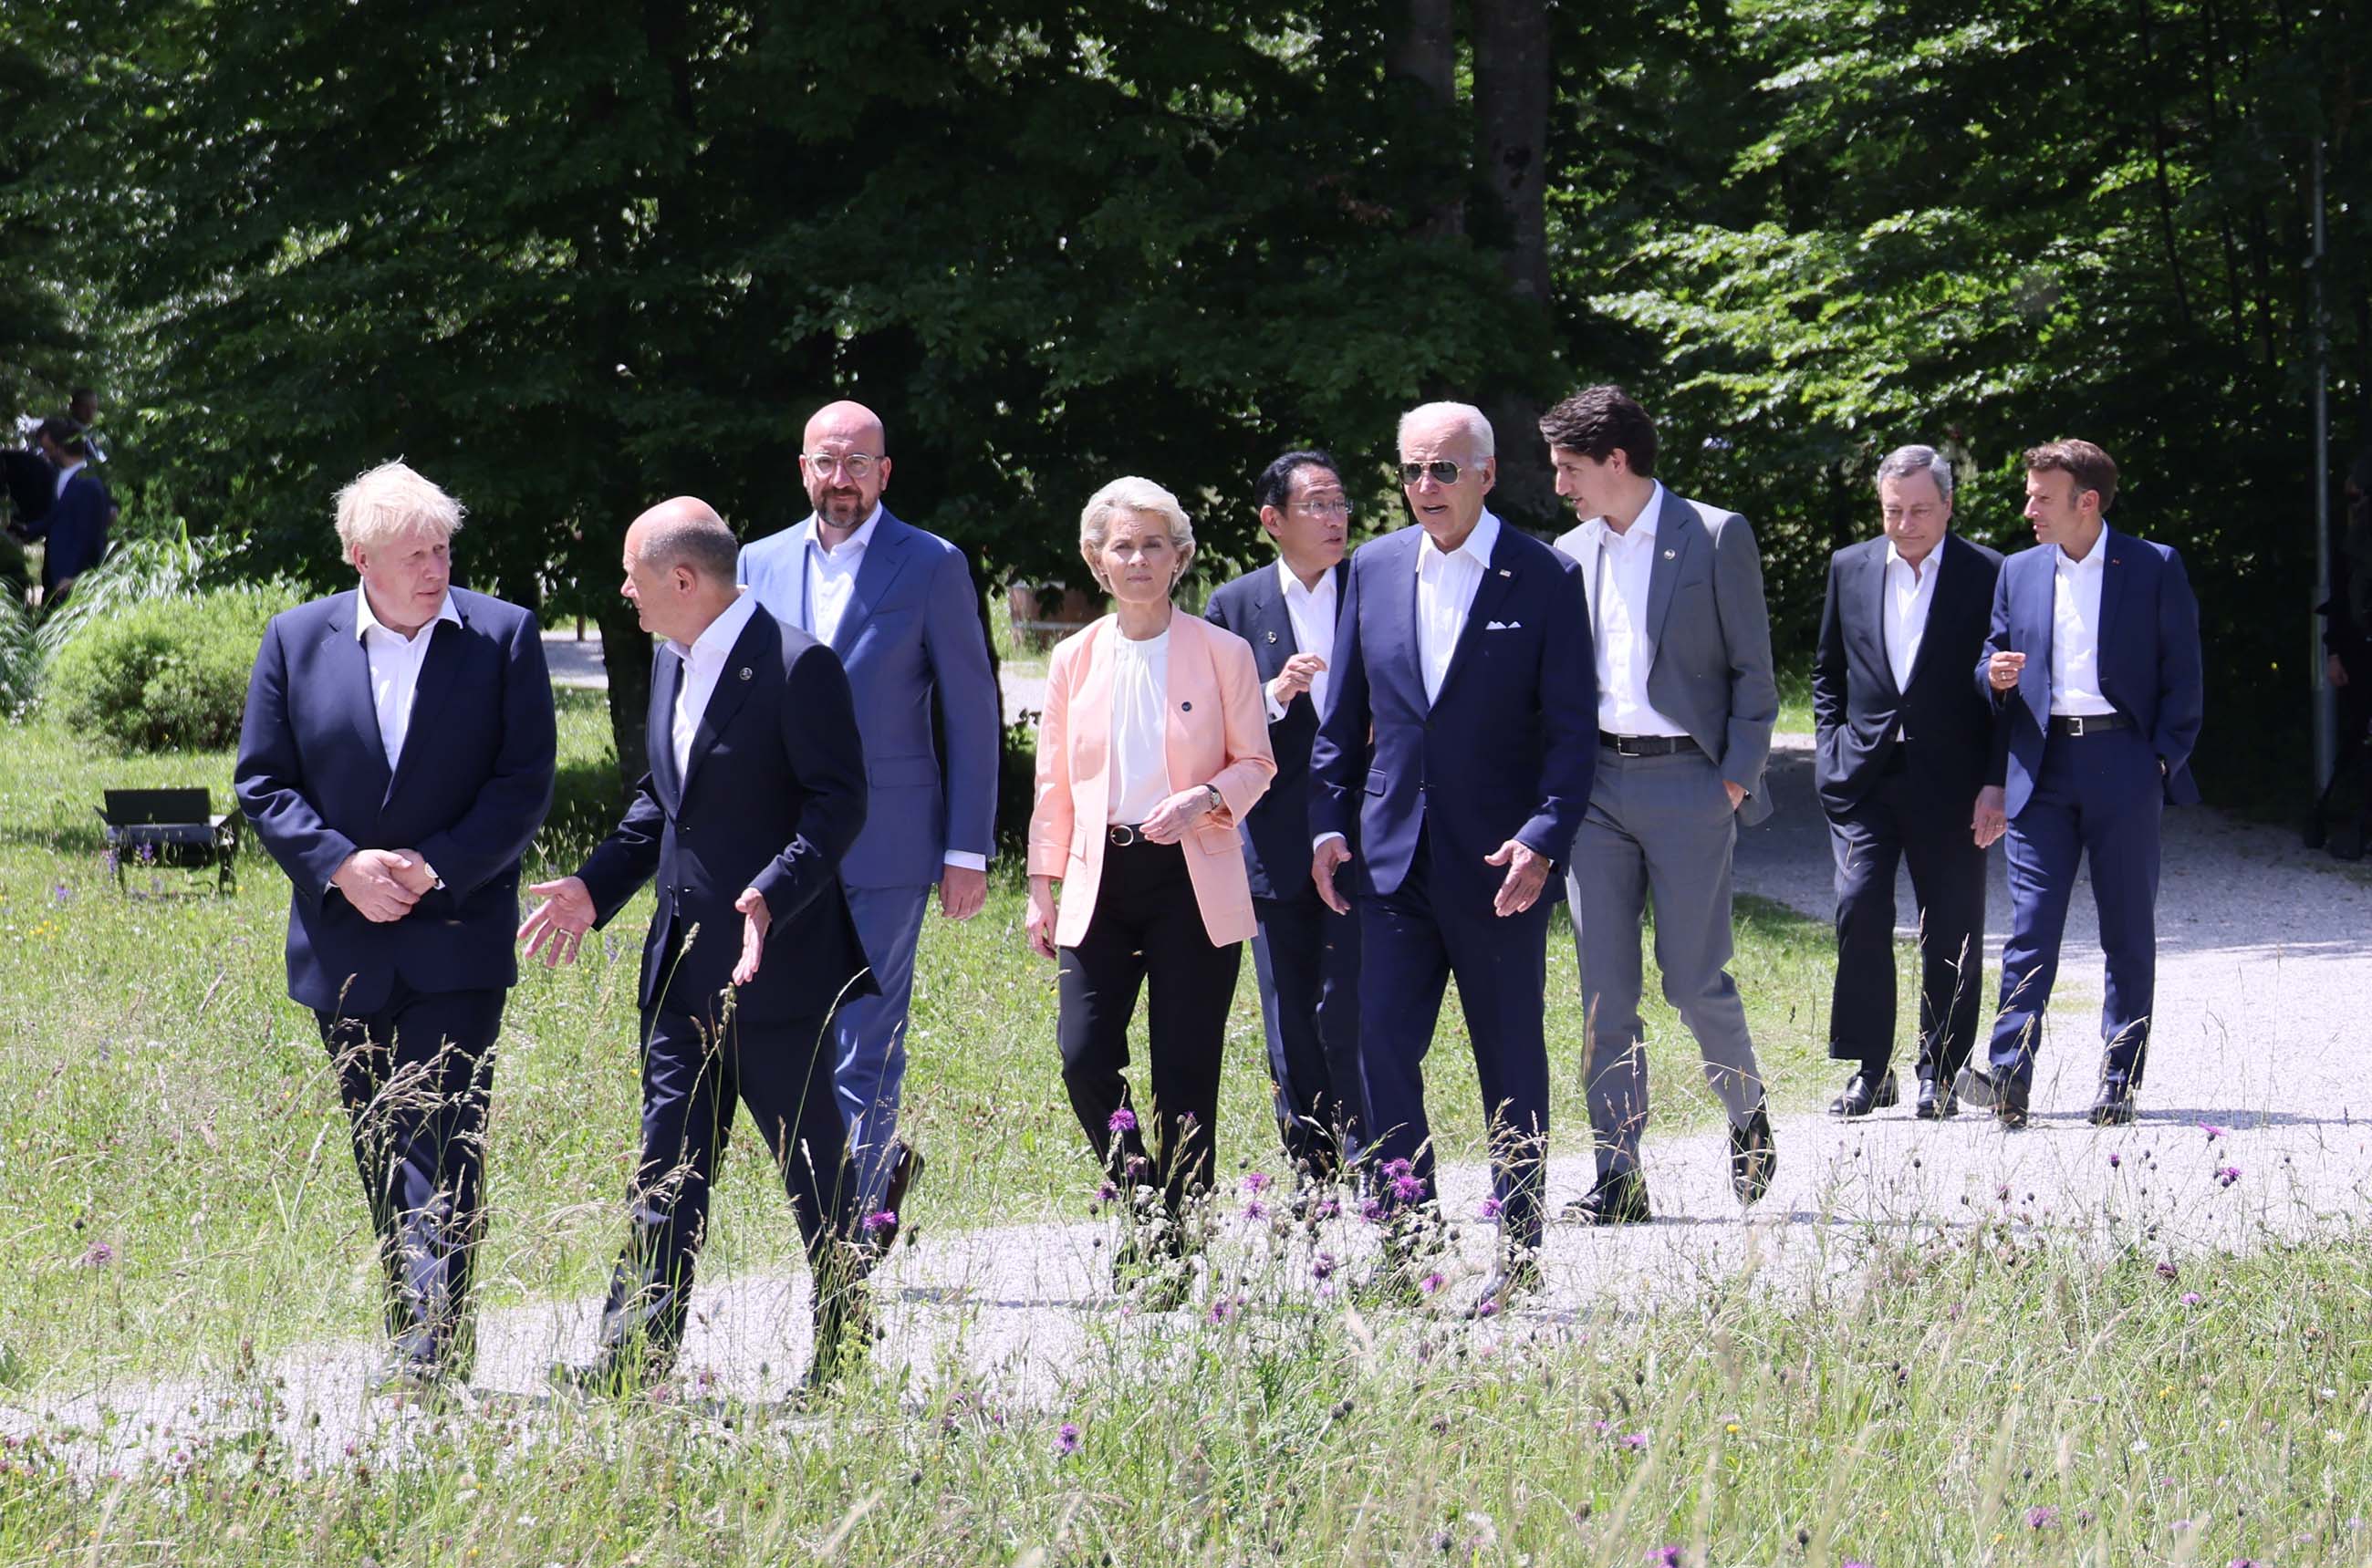 Photograph of the leaders heading to a group photo session